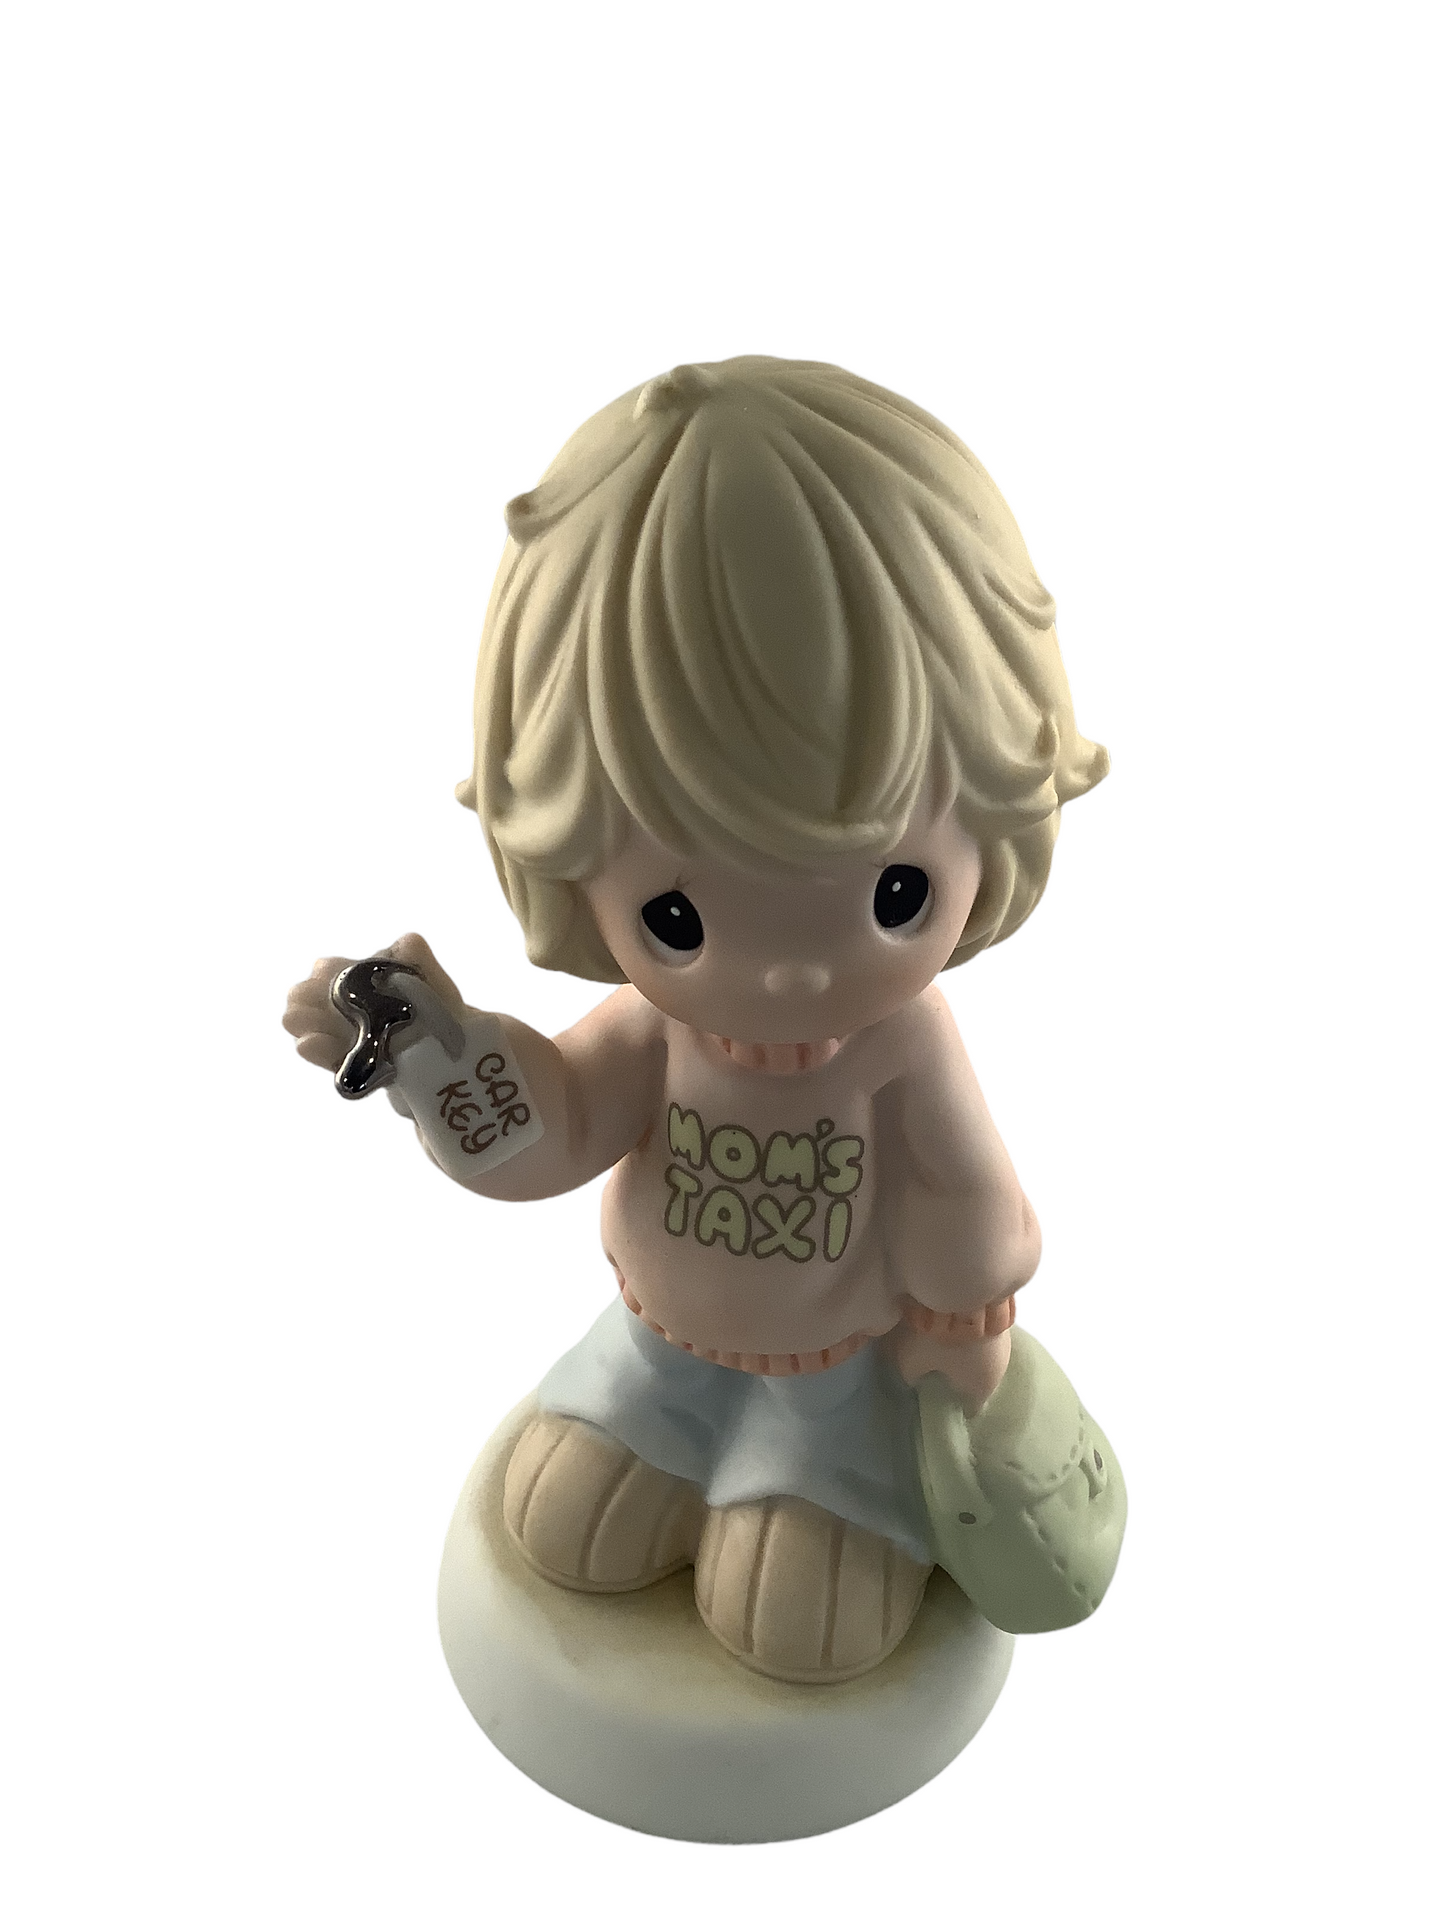 No Rest For The Weary - Precious Moment Figurine